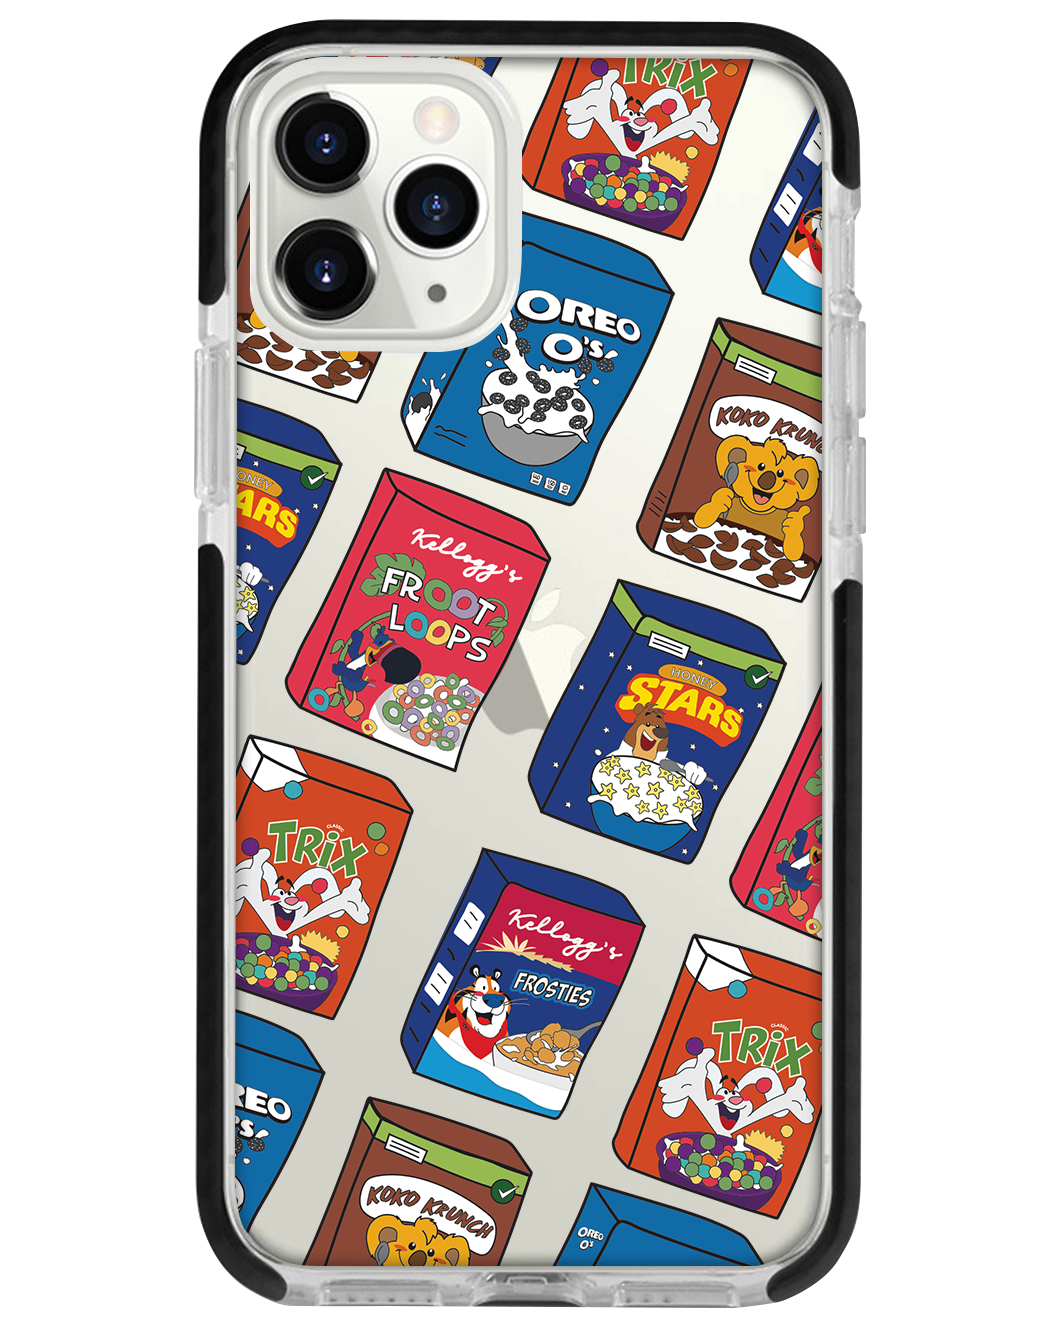 iPhone - Cereal Boxes 2.0